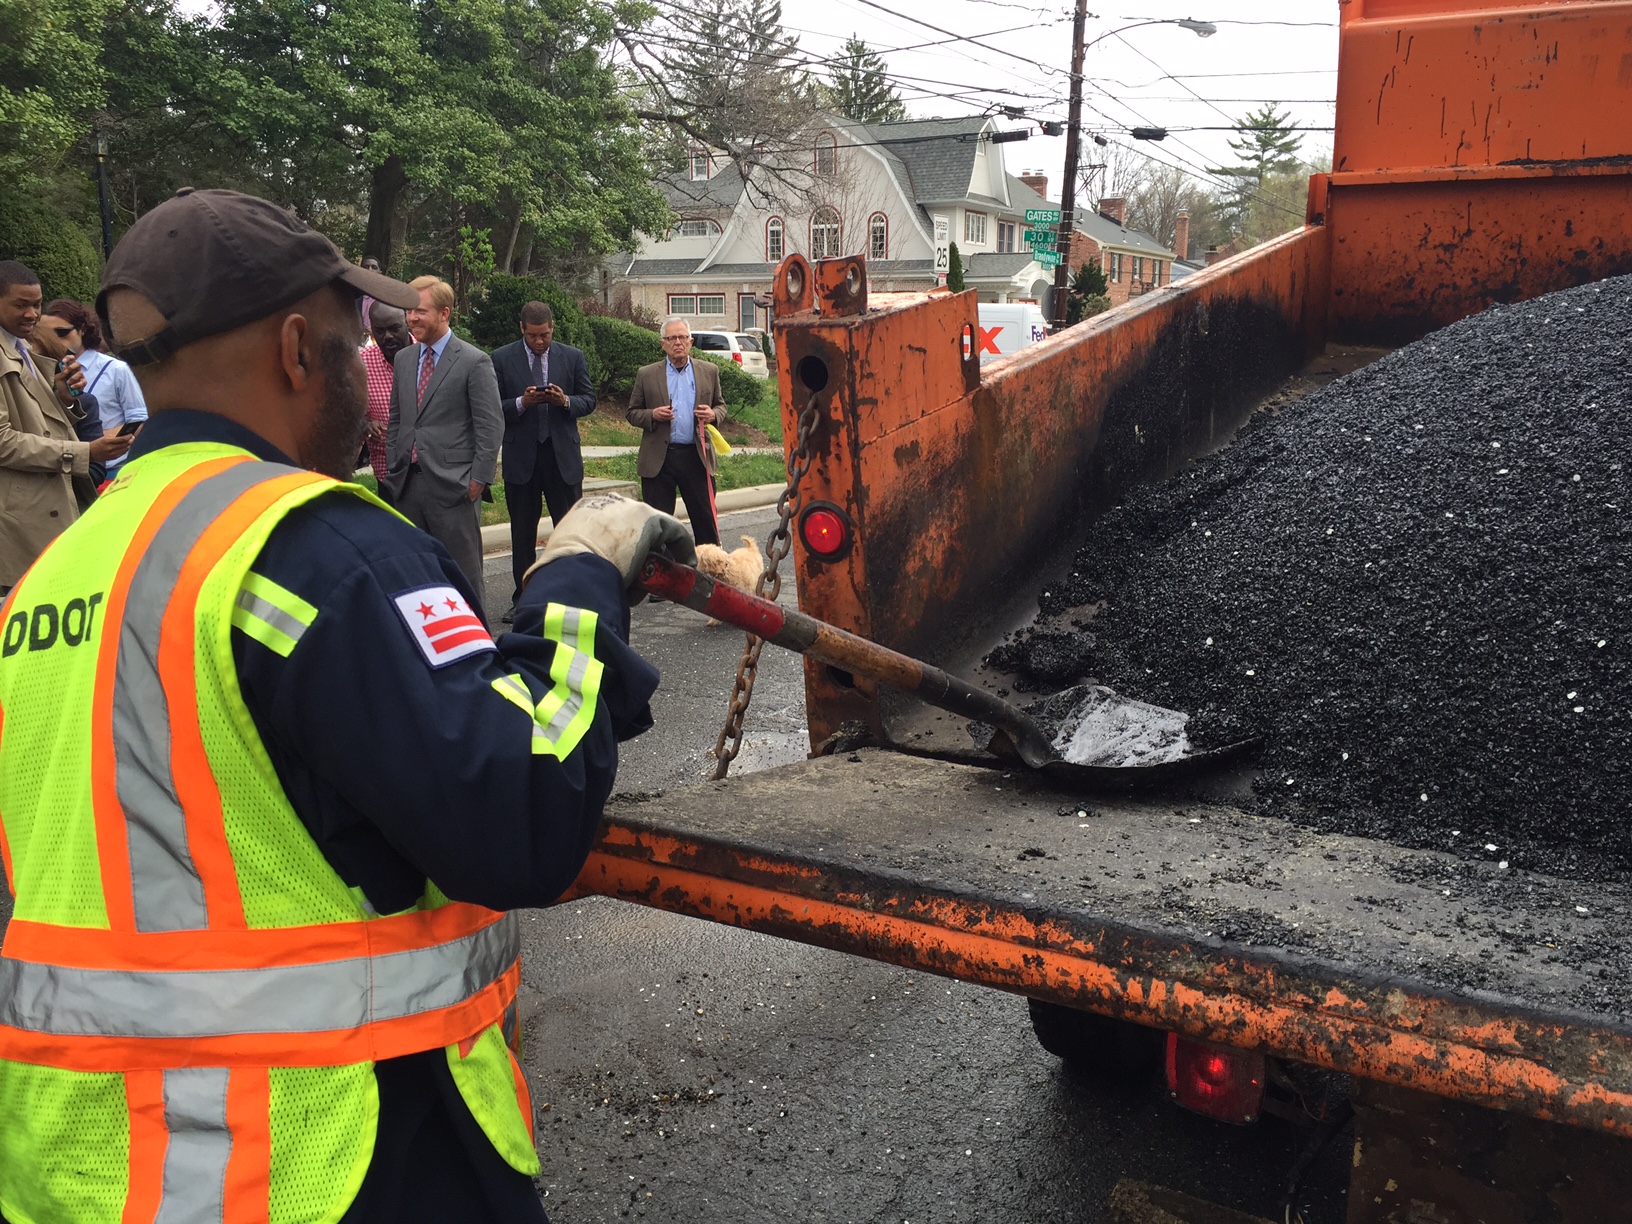 A DDOT worker shovels the warm asphalt from the truck into the waiting potholes. (WTOP/Megan Cloherty)